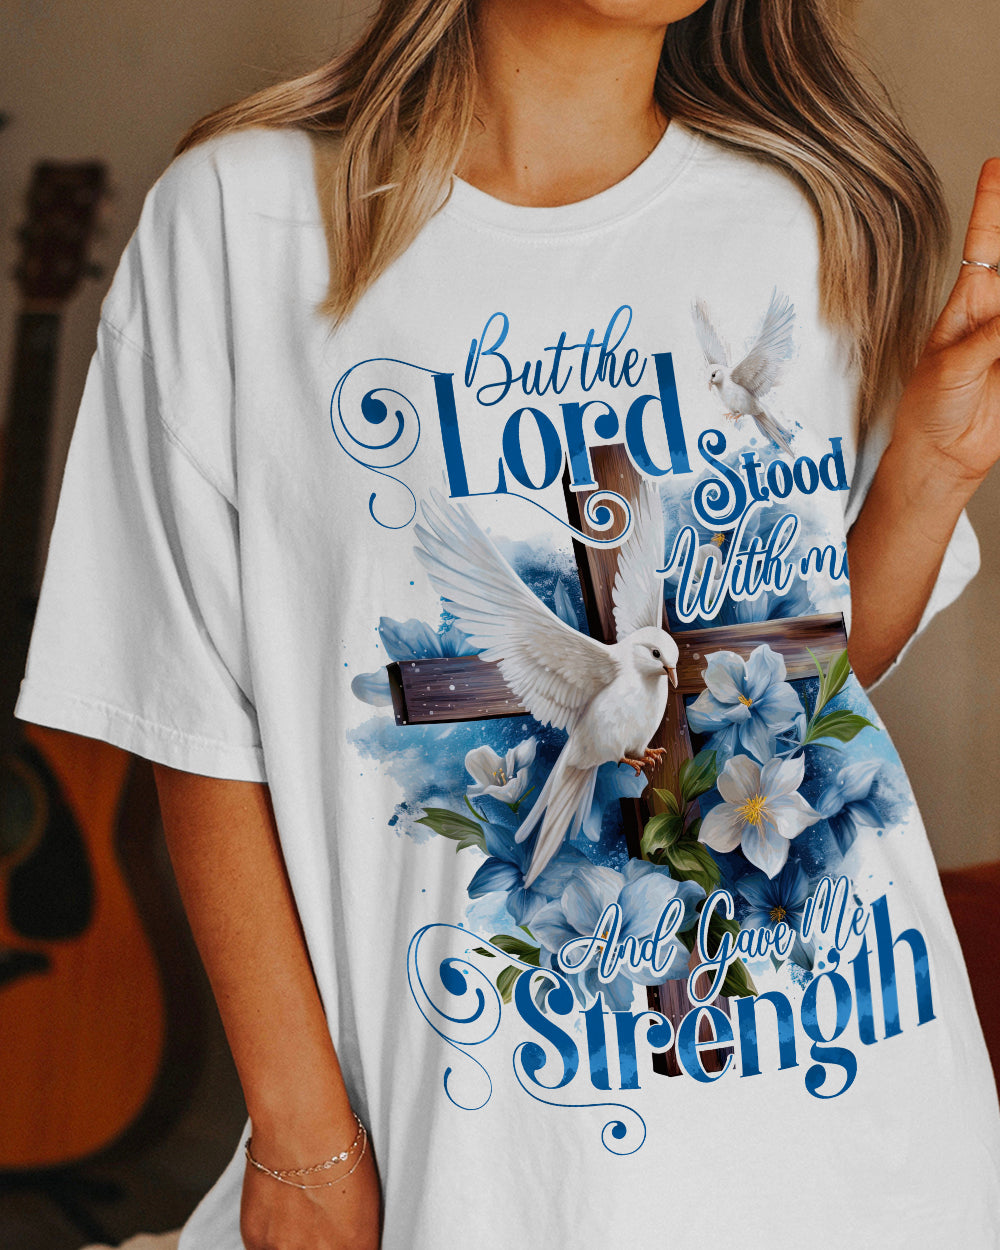 Lord Stood With Me Cotton Shirt - Tytd2808231